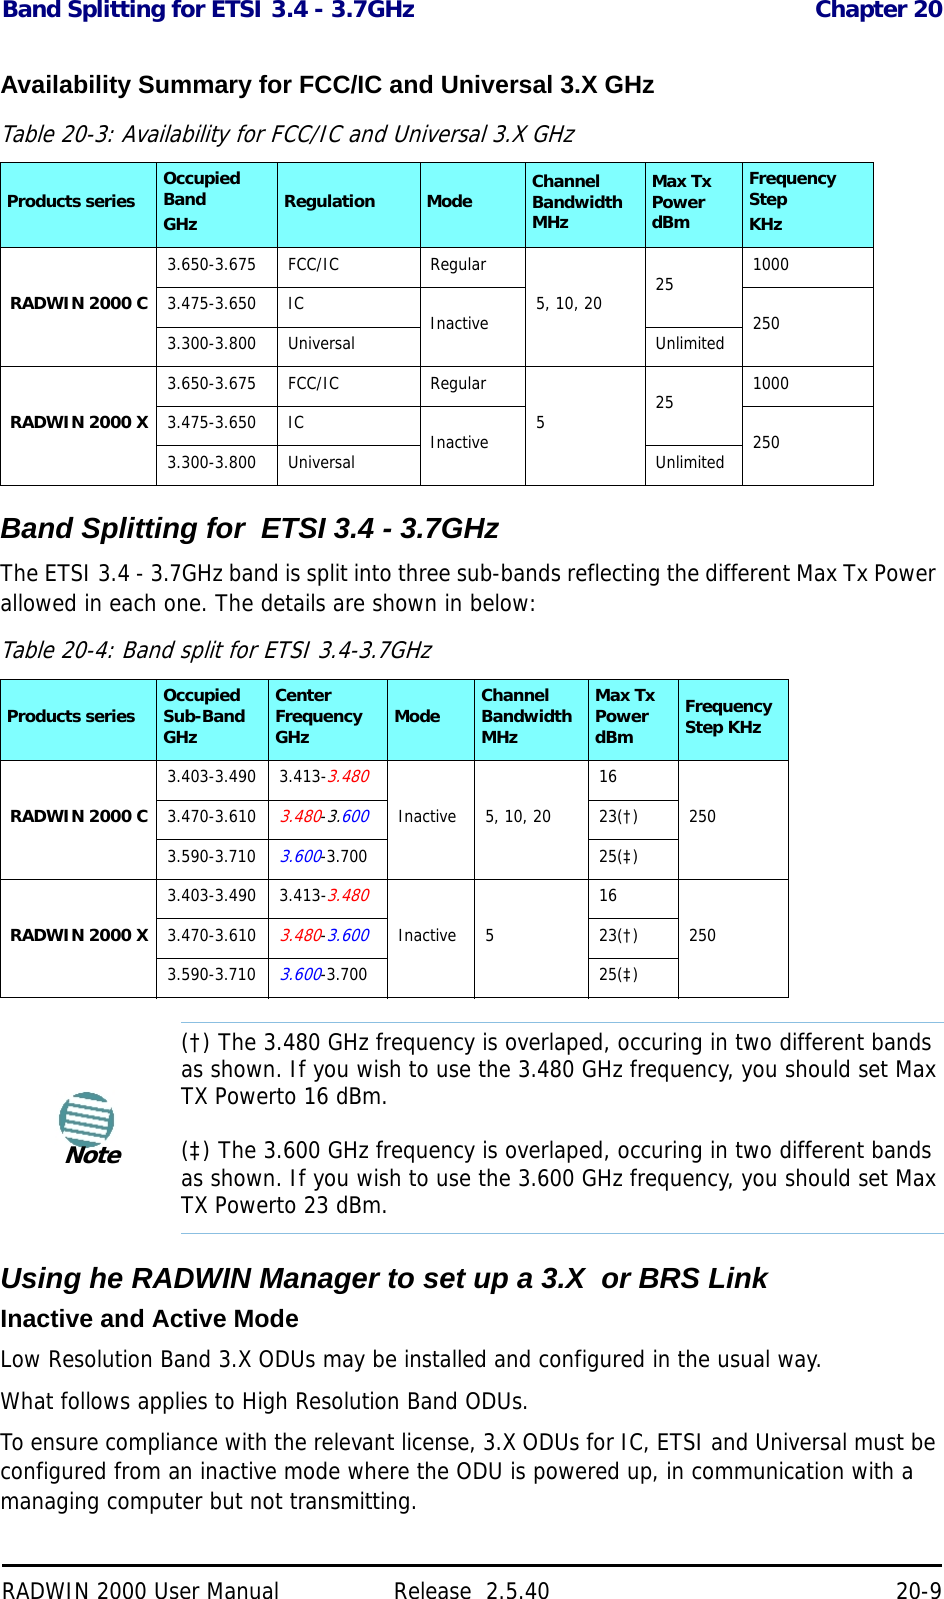 Band Splitting for ETSI 3.4 - 3.7GHz Chapter 20RADWIN 2000 User Manual Release  2.5.40 20-9Availability Summary for FCC/IC and Universal 3.X GHzBand Splitting for  ETSI 3.4 - 3.7GHzThe ETSI 3.4 - 3.7GHz band is split into three sub-bands reflecting the different Max Tx Power allowed in each one. The details are shown in below:Using he RADWIN Manager to set up a 3.X  or BRS LinkInactive and Active ModeLow Resolution Band 3.X ODUs may be installed and configured in the usual way.What follows applies to High Resolution Band ODUs.To ensure compliance with the relevant license, 3.X ODUs for IC, ETSI and Universal must be configured from an inactive mode where the ODU is powered up, in communication with a managing computer but not transmitting.Table 20-3: Availability for FCC/IC and Universal 3.X GHzProducts series Occupied BandGHz Regulation Mode Channel Bandwidth MHzMax Tx Power dBmFrequency StepKHzRADWIN 2000 C3.650-3.675  FCC/IC Regular5, 10, 20 25 10003.475-3.650  IC Inactive 2503.300-3.800 Universal UnlimitedRADWIN 2000 X3.650-3.675  FCC/IC Regular525 10003.475-3.650  IC Inactive 2503.300-3.800 Universal UnlimitedTable 20-4: Band split for ETSI 3.4-3.7GHzProducts series Occupied Sub-Band GHzCenter Frequency GHz Mode Channel Bandwidth MHzMax Tx Power dBmFrequency Step KHzRADWIN 2000 C3.403-3.490 3.413-3.480Inactive 5, 10, 20162503.470-3.6103.480-3.60023(†)3.590-3.7103.600-3.700 25(‡)RADWIN 2000 X3.403-3.490 3.413-3.480Inactive 5162503.470-3.6103.480-3.60023(†)3.590-3.7103.600-3.700 25(‡)Note(†) The 3.480 GHz frequency is overlaped, occuring in two different bands as shown. If you wish to use the 3.480 GHz frequency, you should set Max TX Powerto 16 dBm.(‡) The 3.600 GHz frequency is overlaped, occuring in two different bands as shown. If you wish to use the 3.600 GHz frequency, you should set Max TX Powerto 23 dBm.